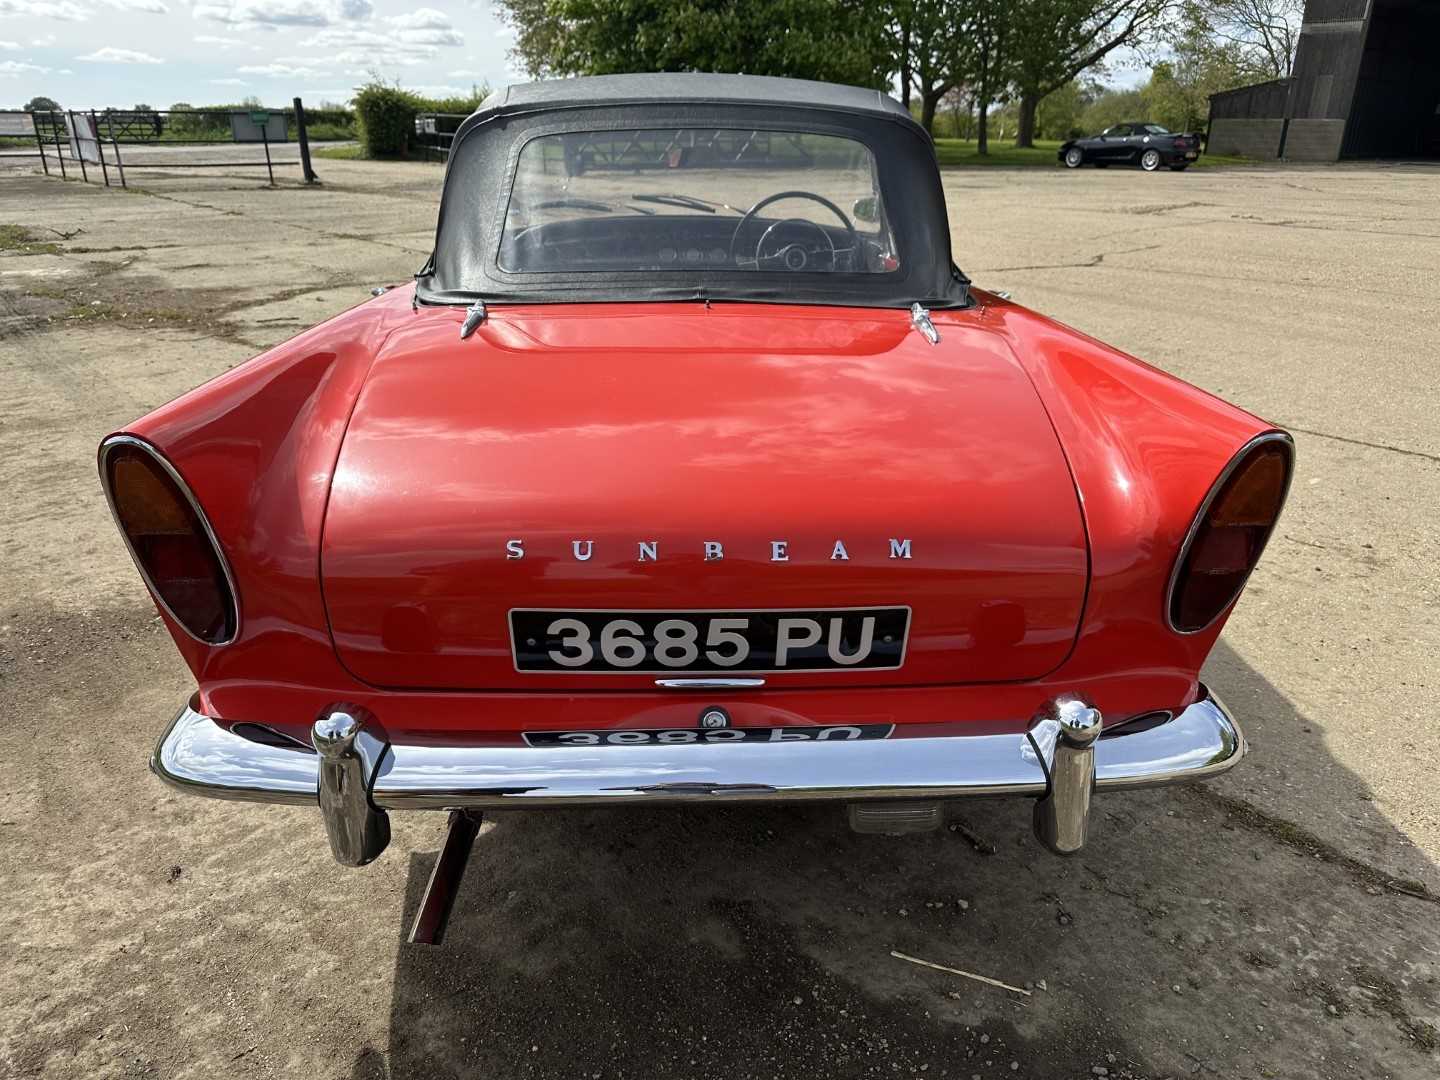 1960 Sunbeam Alpine sports convertible, 1600cc engine, manual gearbox with overdrive, reg. no. 3685 - Image 3 of 30